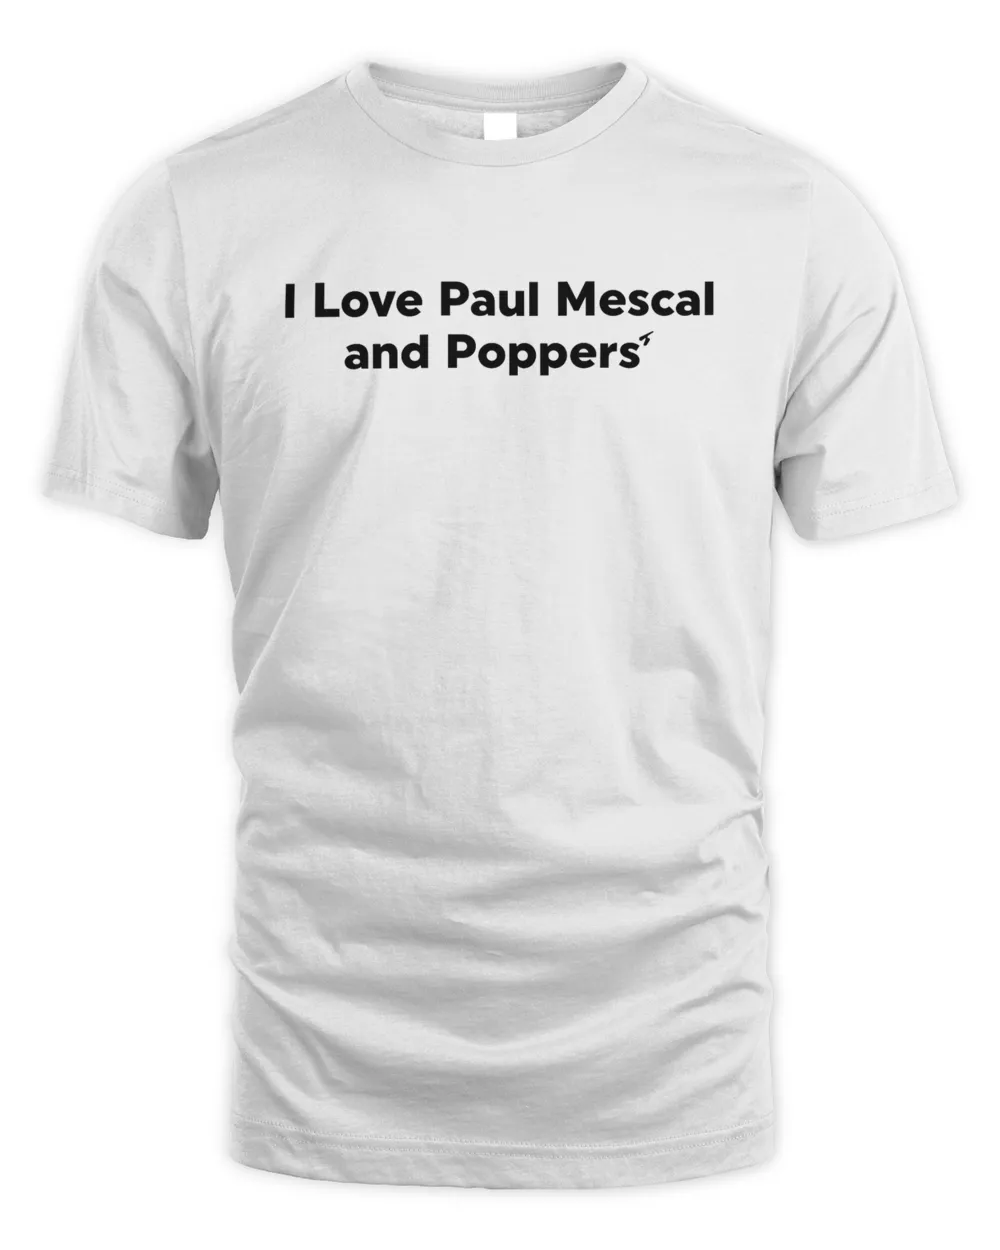 I Love Paul Mescal And Poppers' Tee Shirt Unisex Standard T-Shirt white 